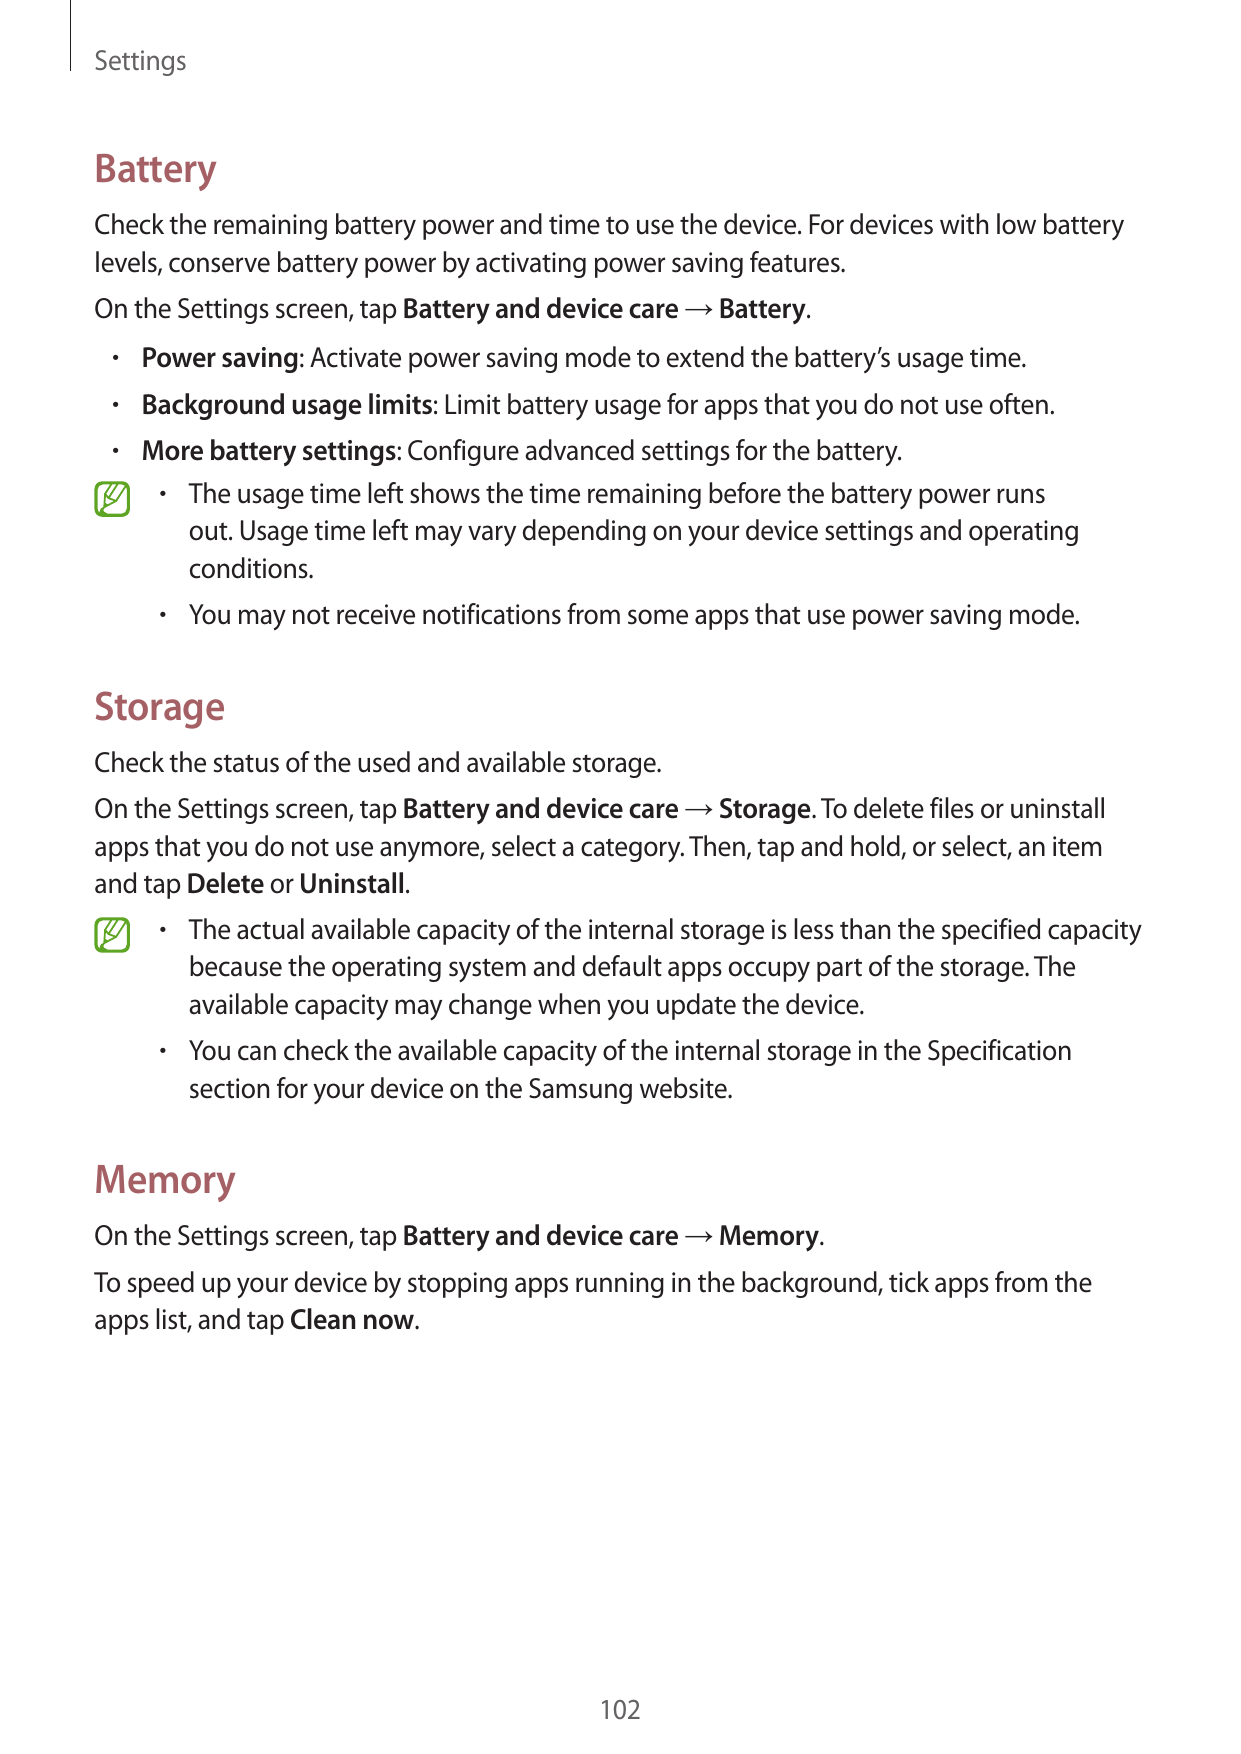 SettingsBatteryCheck the remaining battery power and time to use the device. For devices with low batterylevels, conserve batter